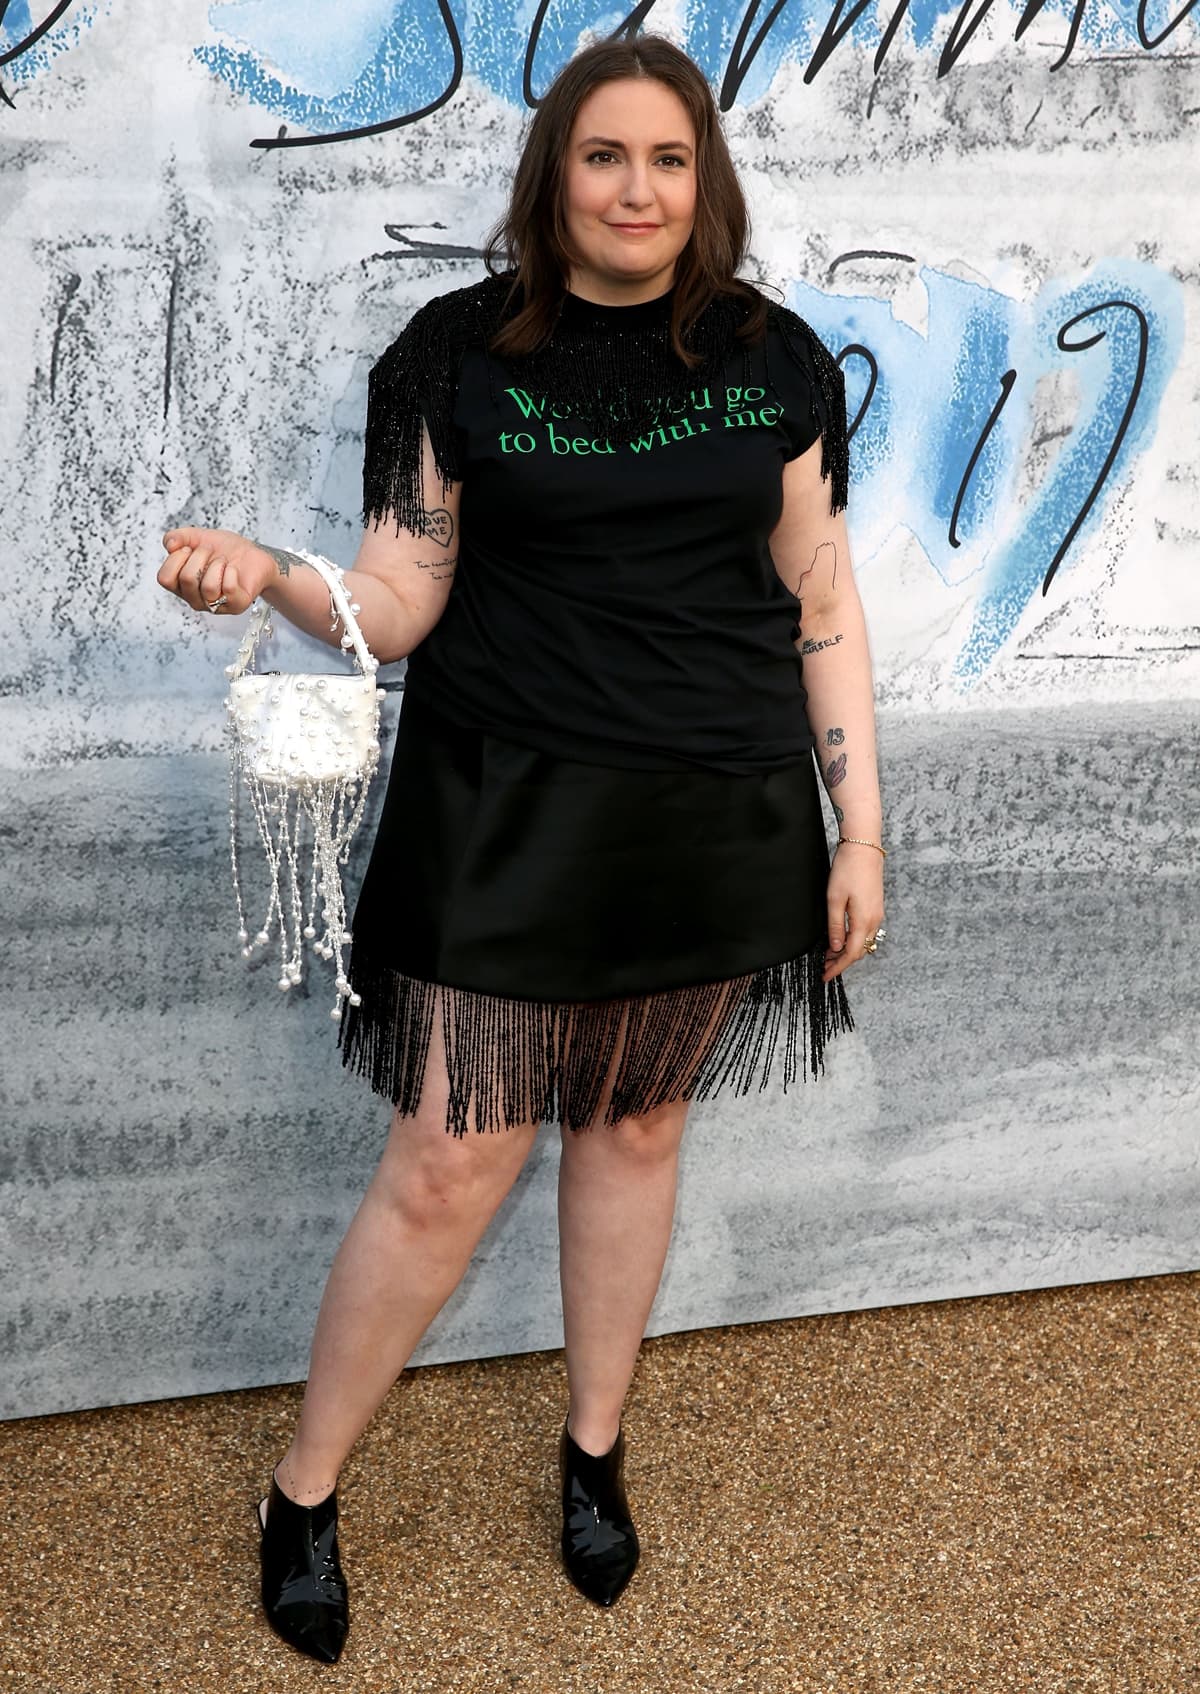 Lena Dunham in a Christopher Kane 'Would you go to be with me?' print fringe-trimmed T-shirt and a fringe skirt